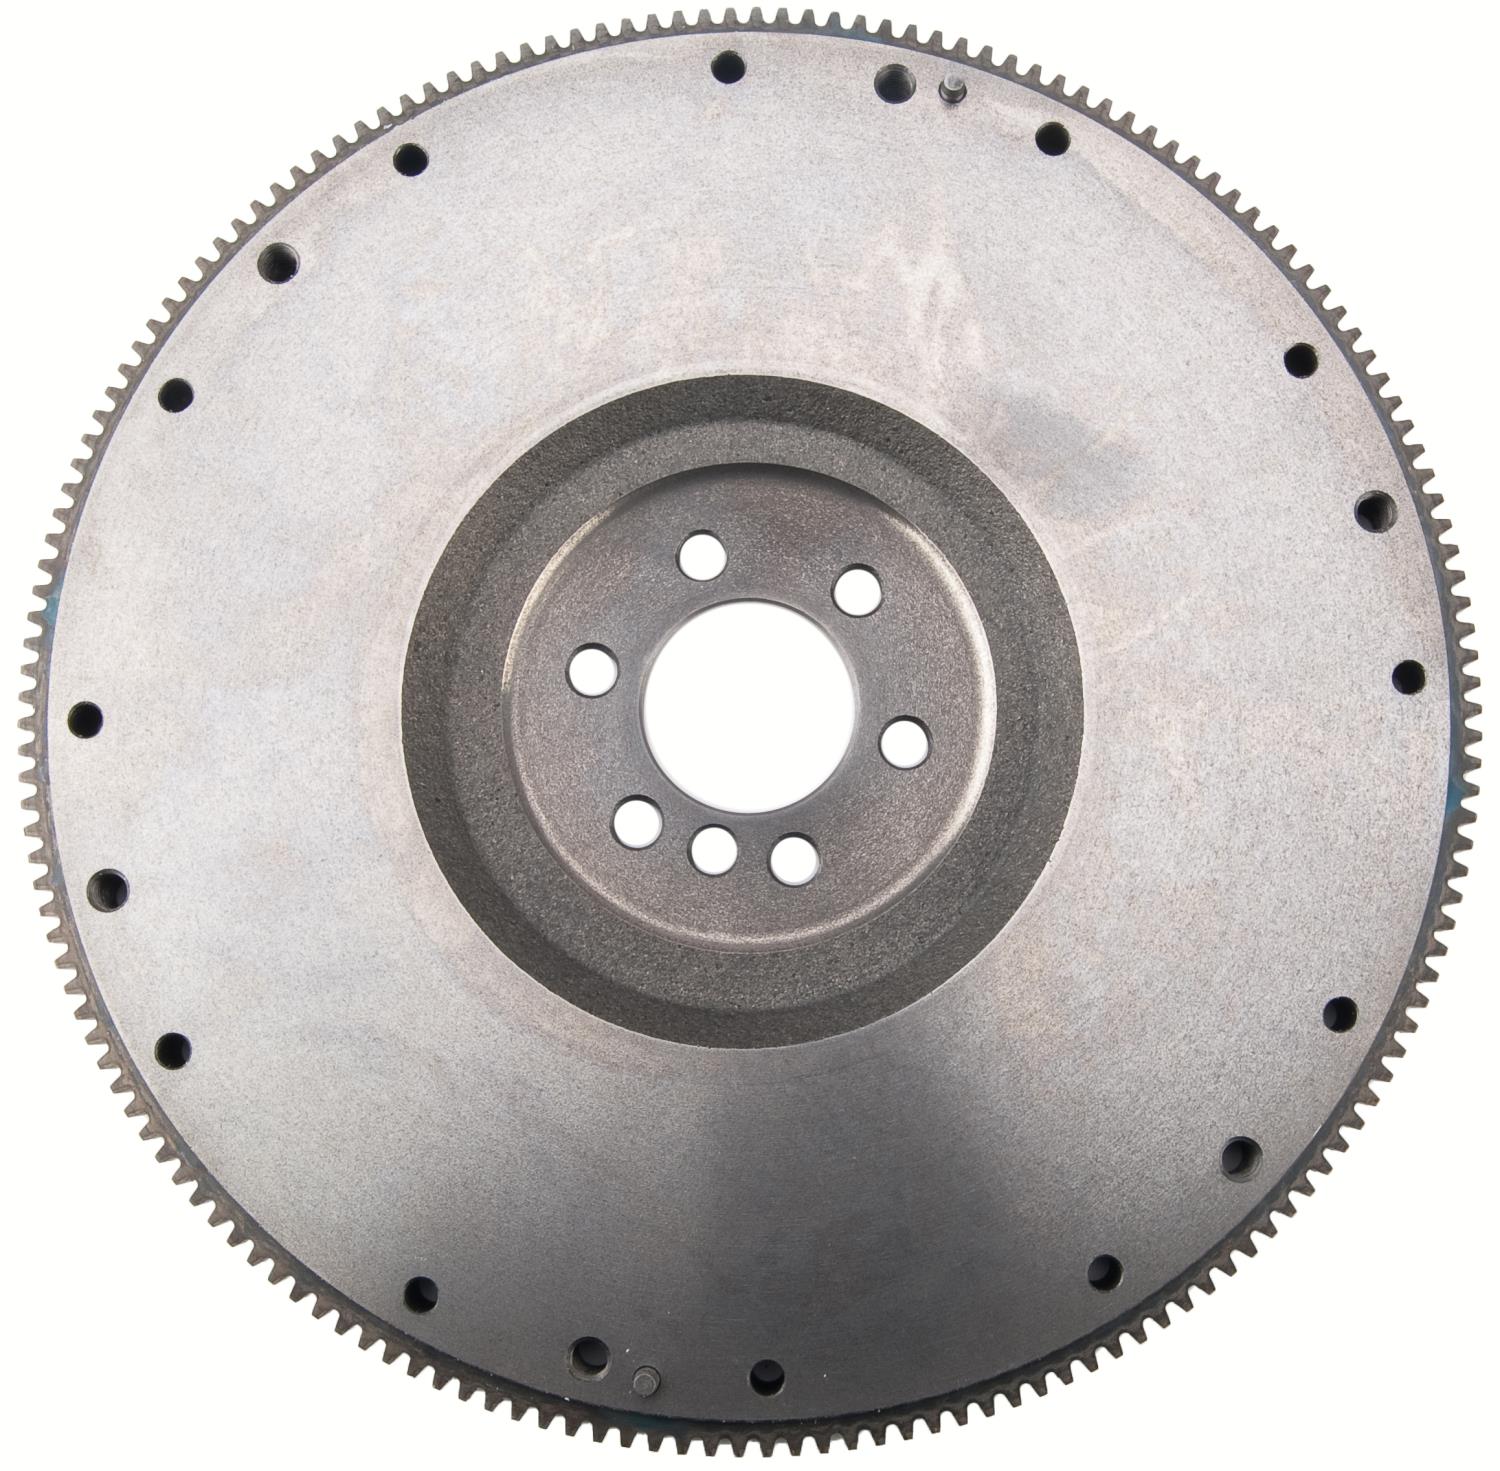 Flywheel for 1997-2004 GM LS1 and LS6 5.7L,